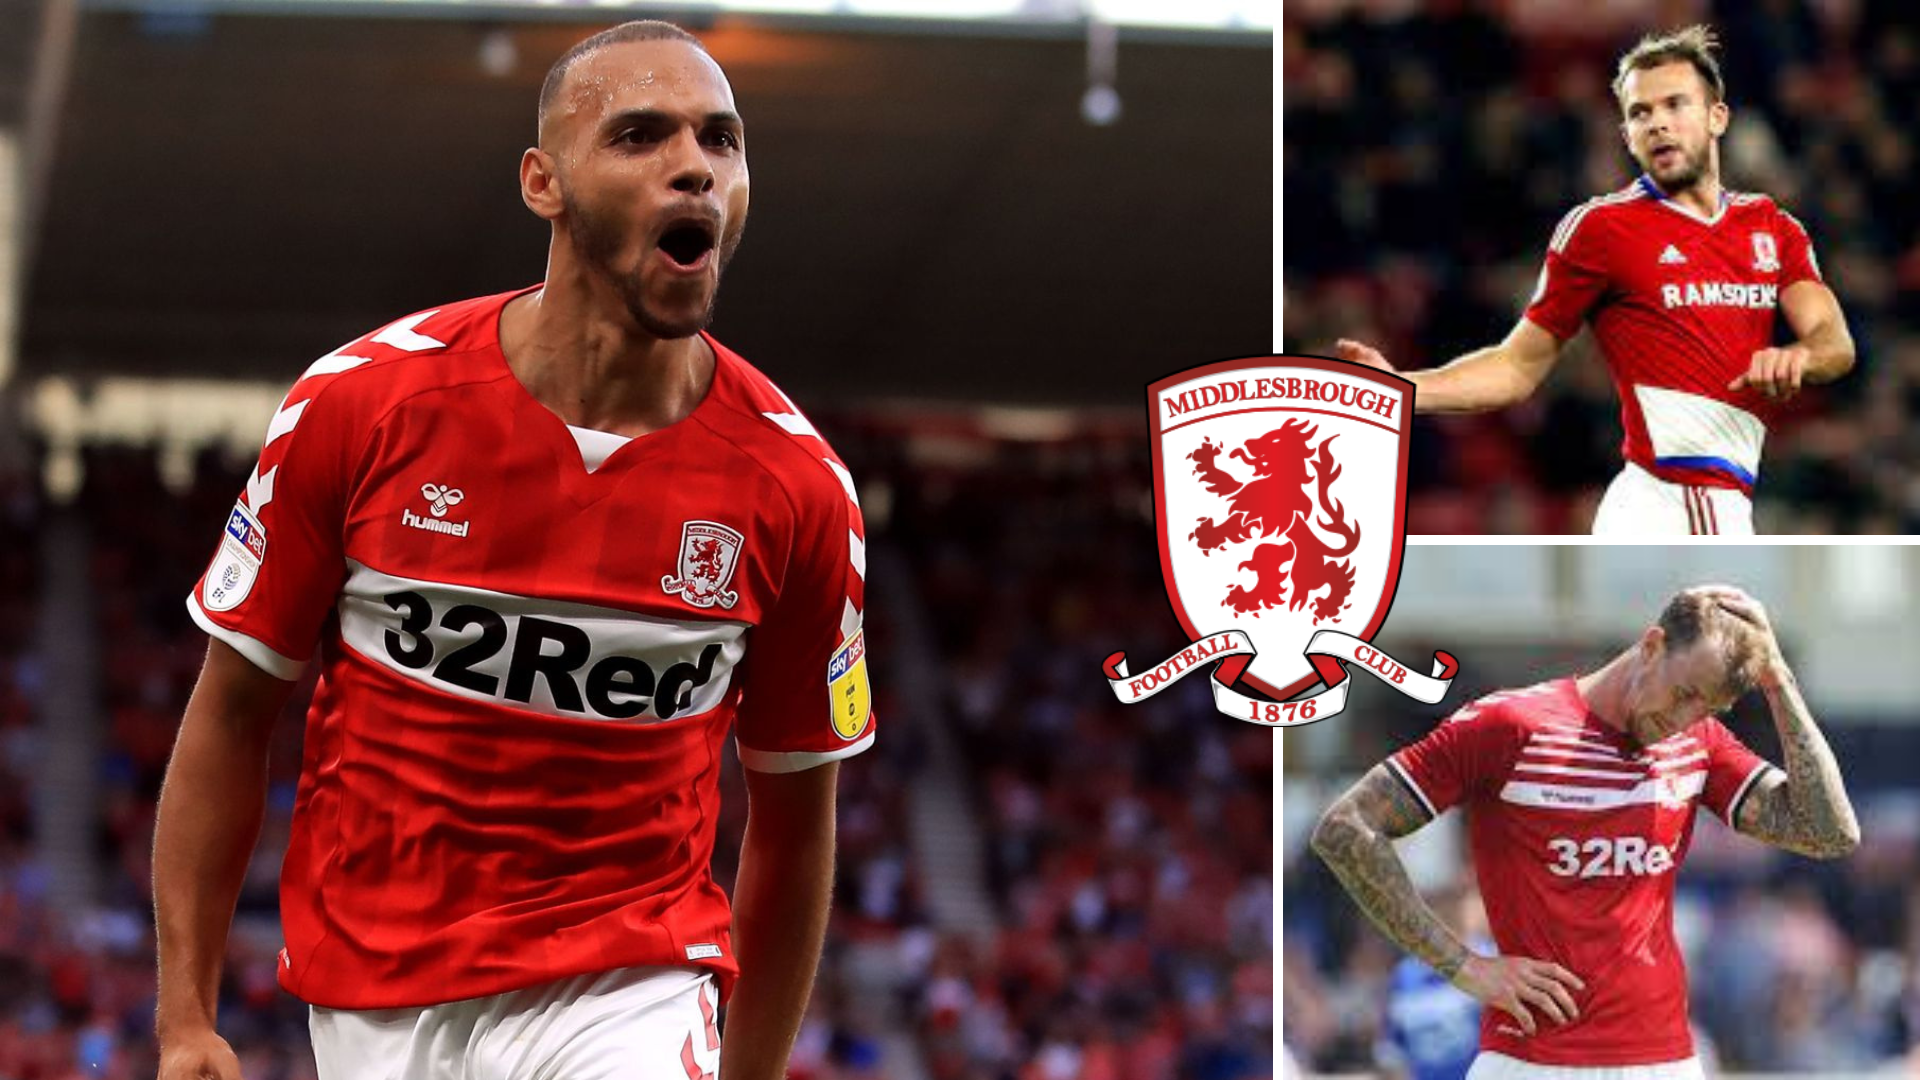 Middlesbrough’s 3 most underwhelming signings from the last 10 years